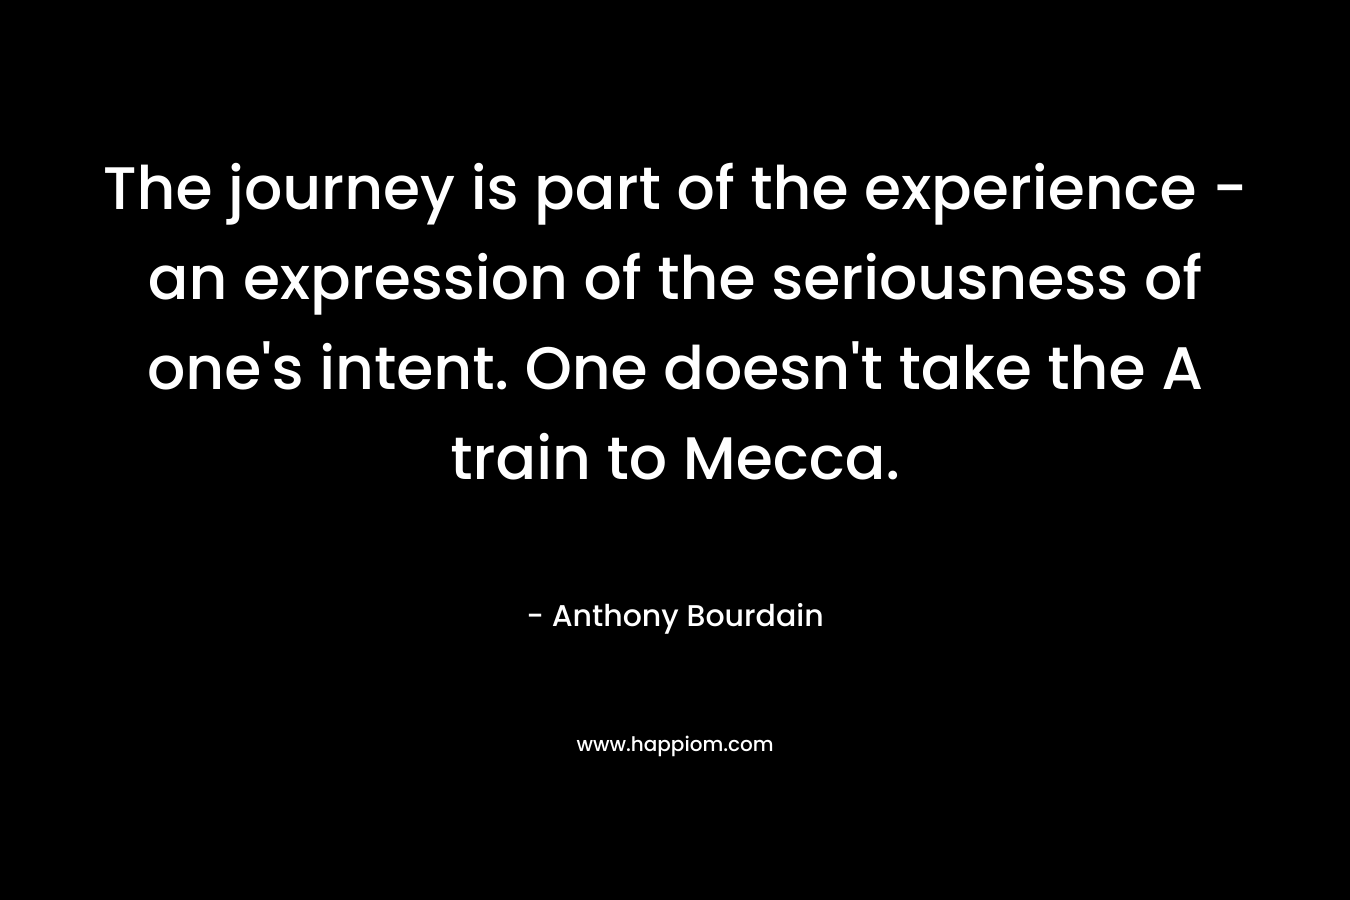 The journey is part of the experience – an expression of the seriousness of one’s intent. One doesn’t take the A train to Mecca. – Anthony Bourdain